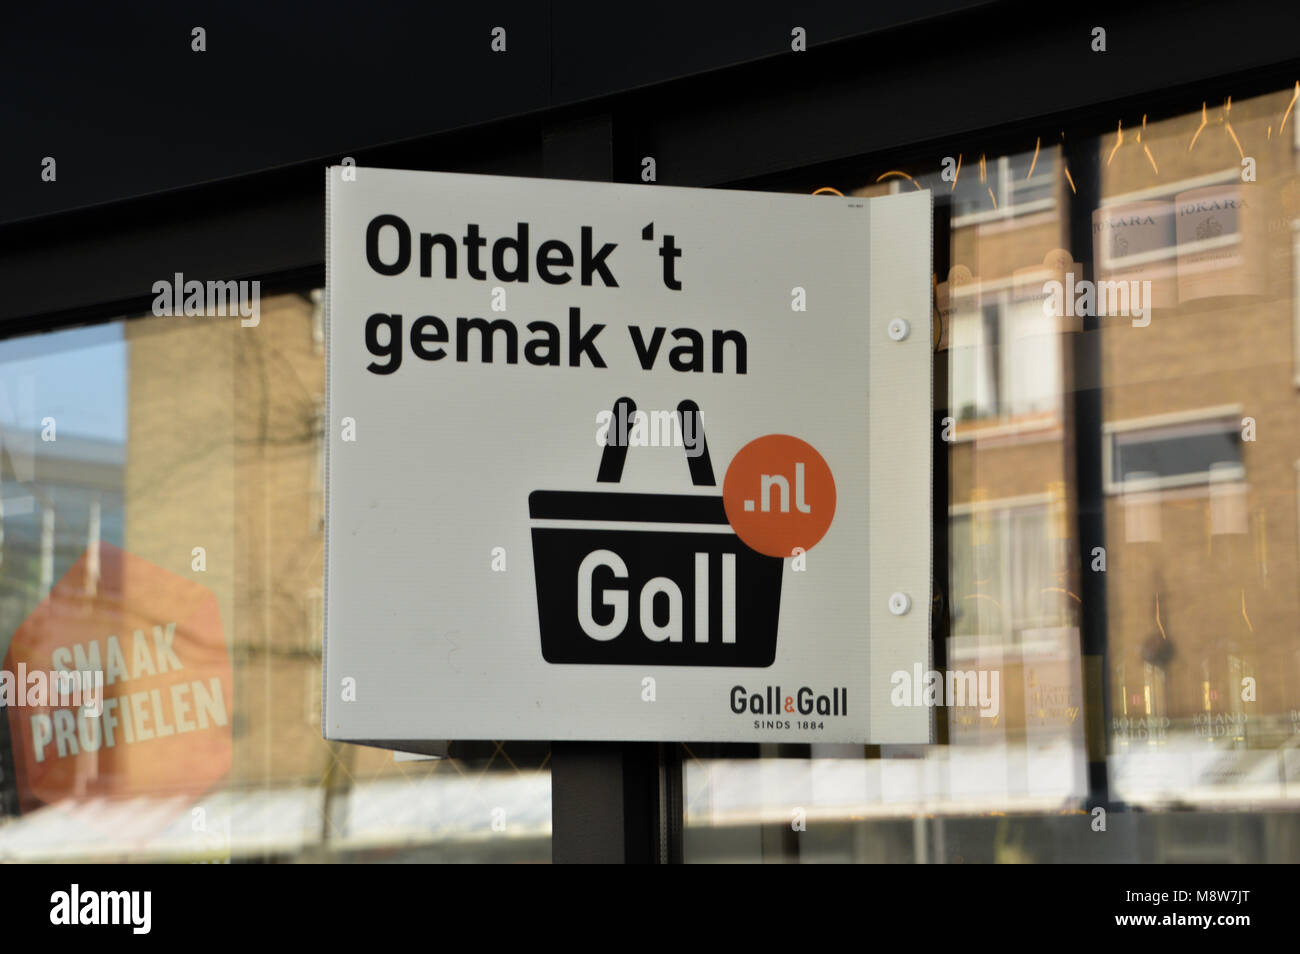 Gall & Gall Liqour Shop Billboard At Amsterdam The Netherlands Stock Photo